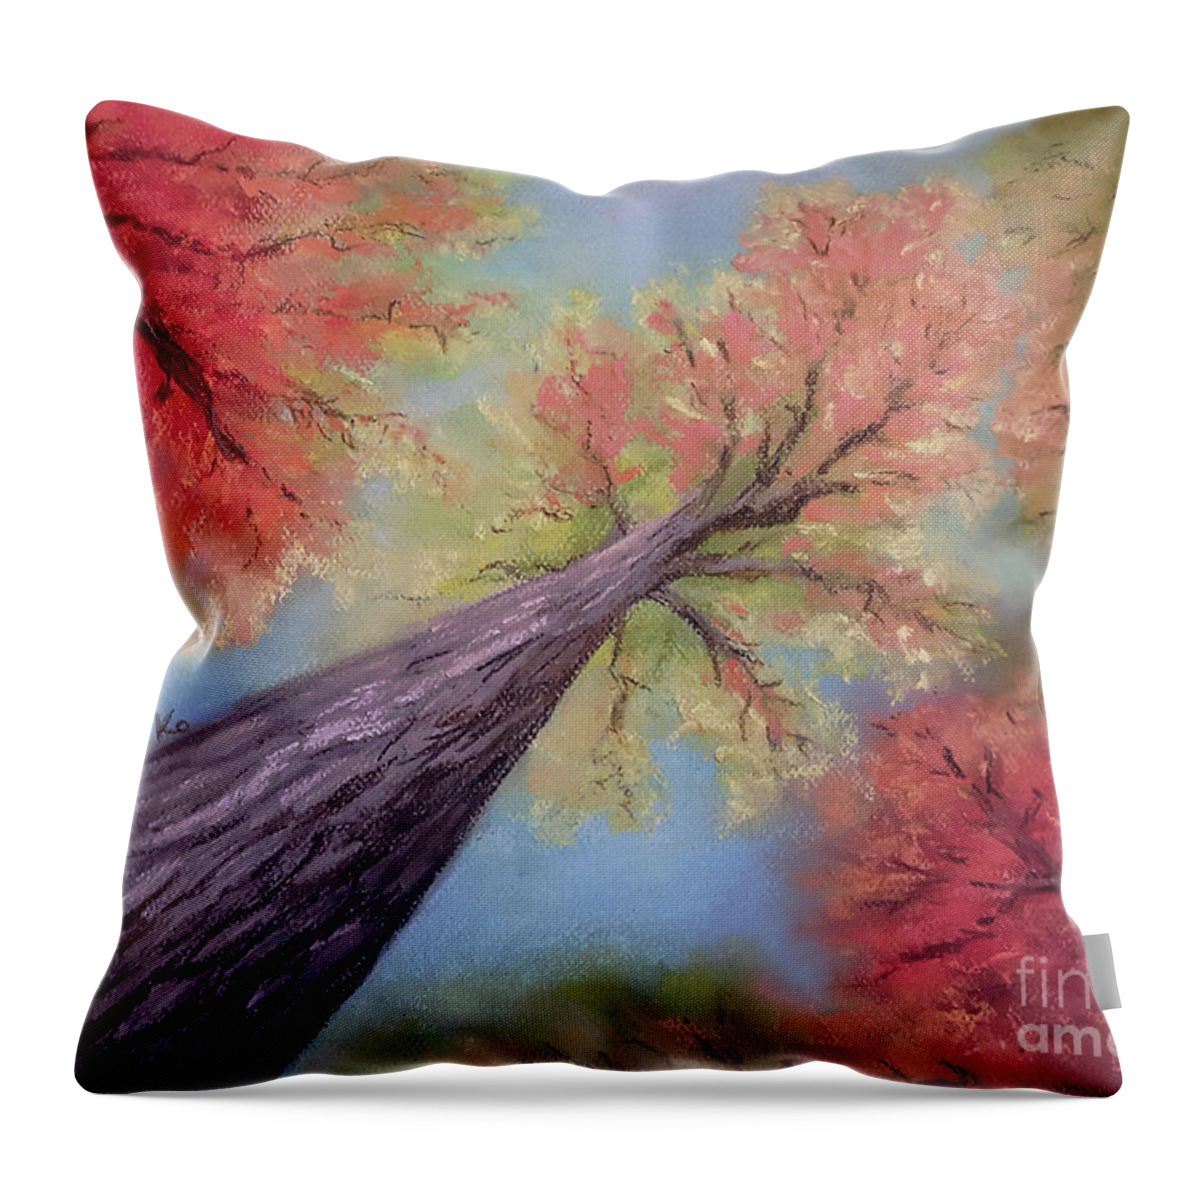 Fall Throw Pillow featuring the painting Fallspective by Yoonhee Ko